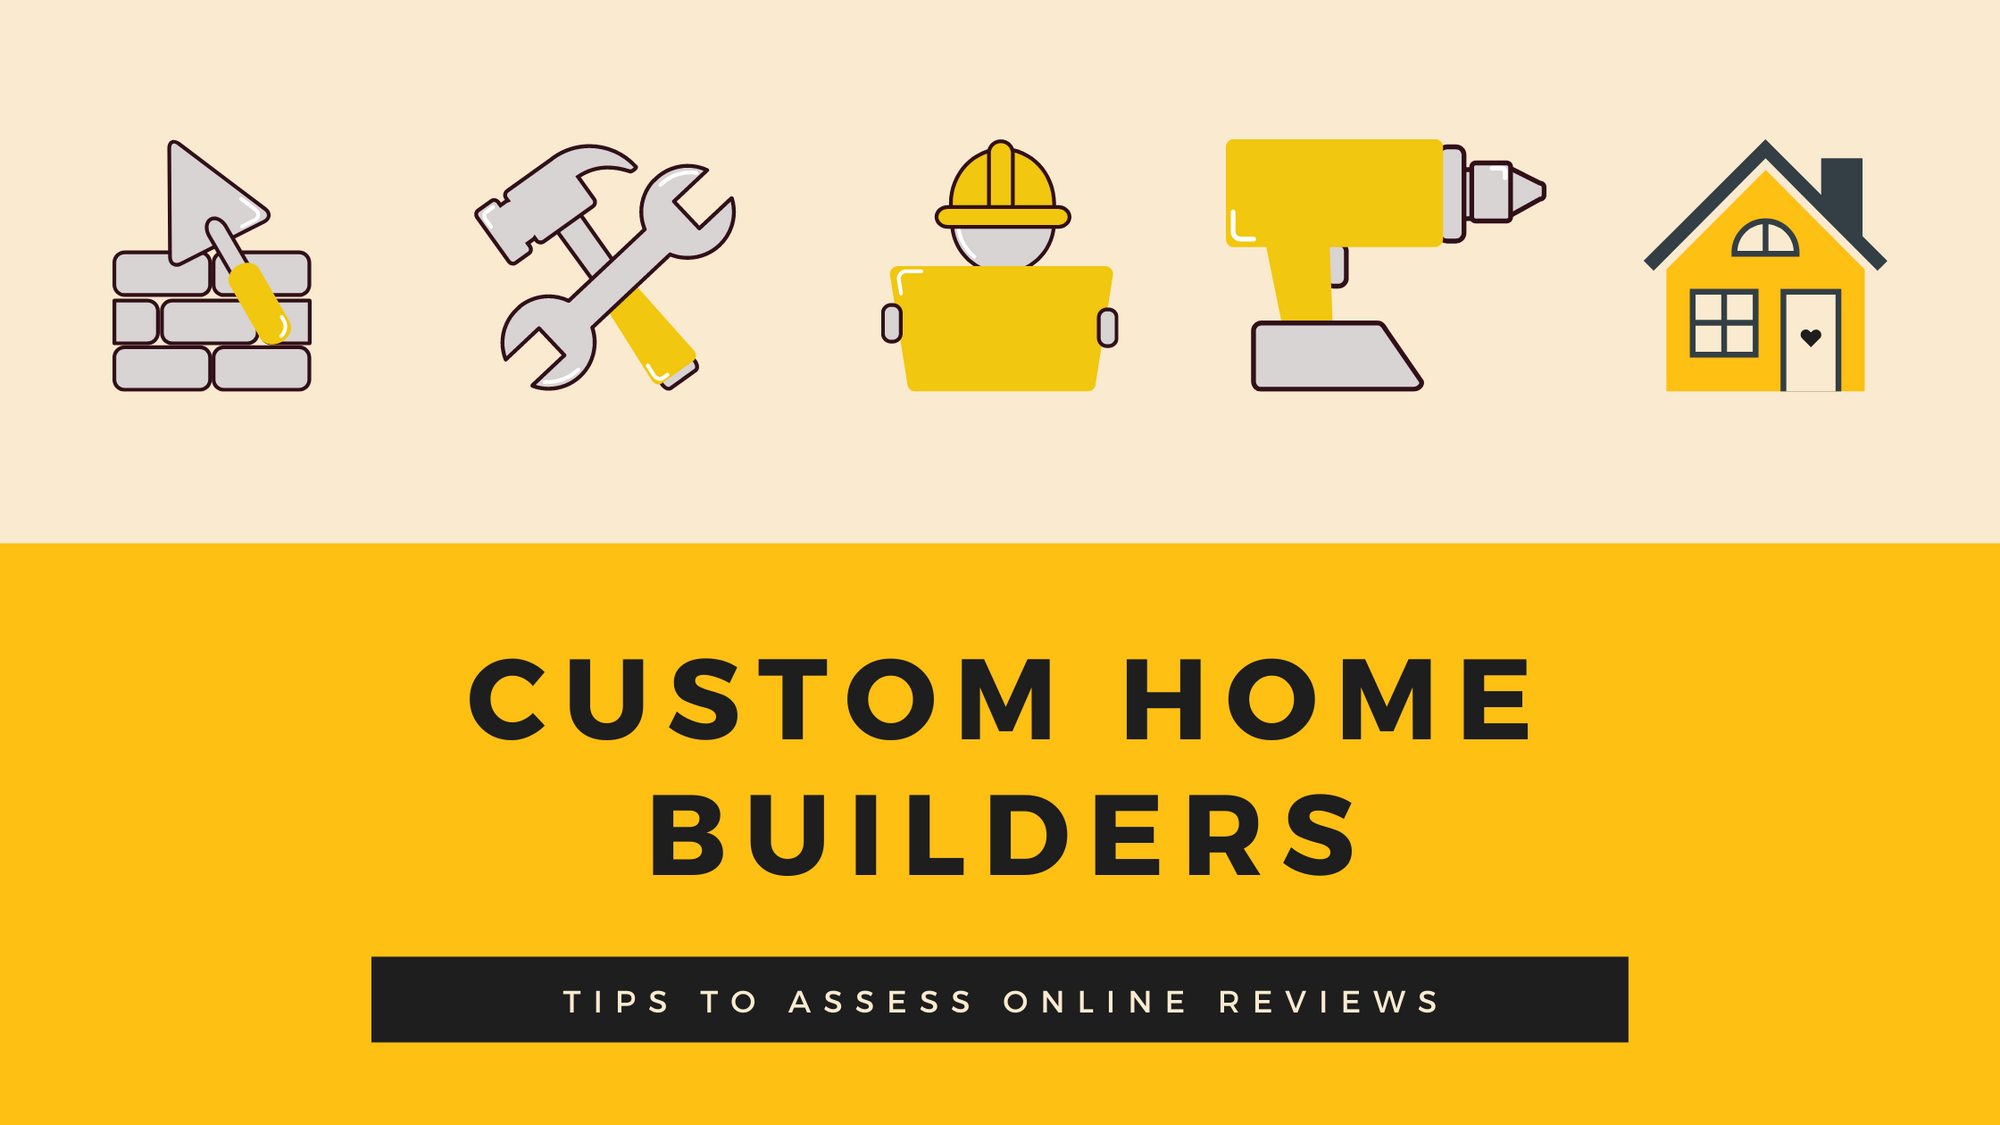 Builders: How to Assess Online Reviews